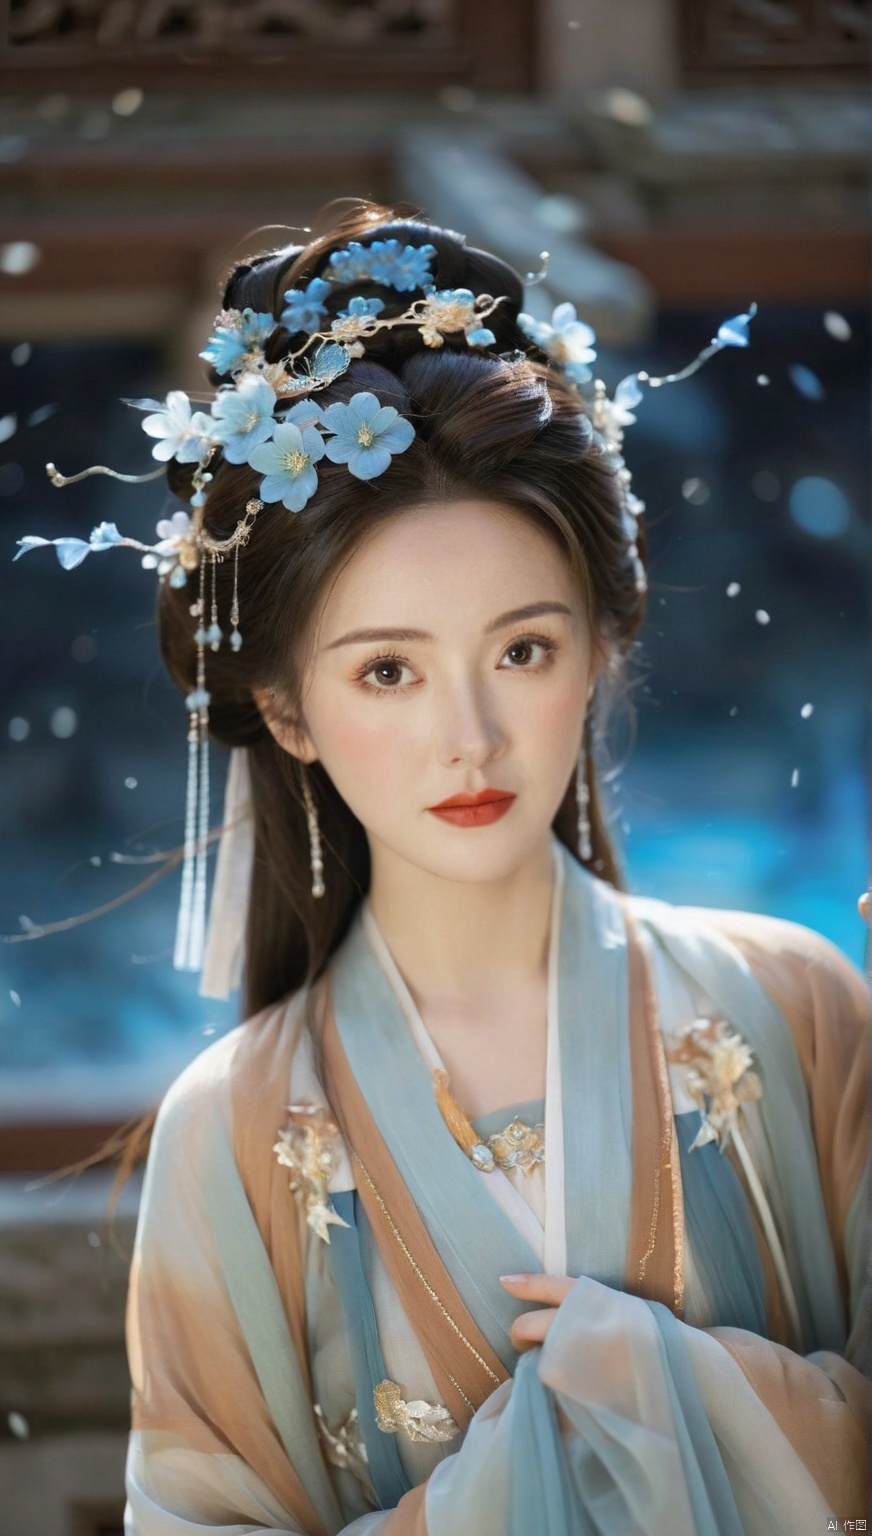 a woman dressed in a traditional chinese Brown hanfu,set against a cosmic backdrop,the woman has a serene expression,wide-eyed,her hair is styled in an intricate updo,and she wear a delicate headpiece,the hanfu is a flowing garment with a gradient of colors,transitioning from a blue at the bottom,environment to nebulae ethereal at night,the background is a starry sky,